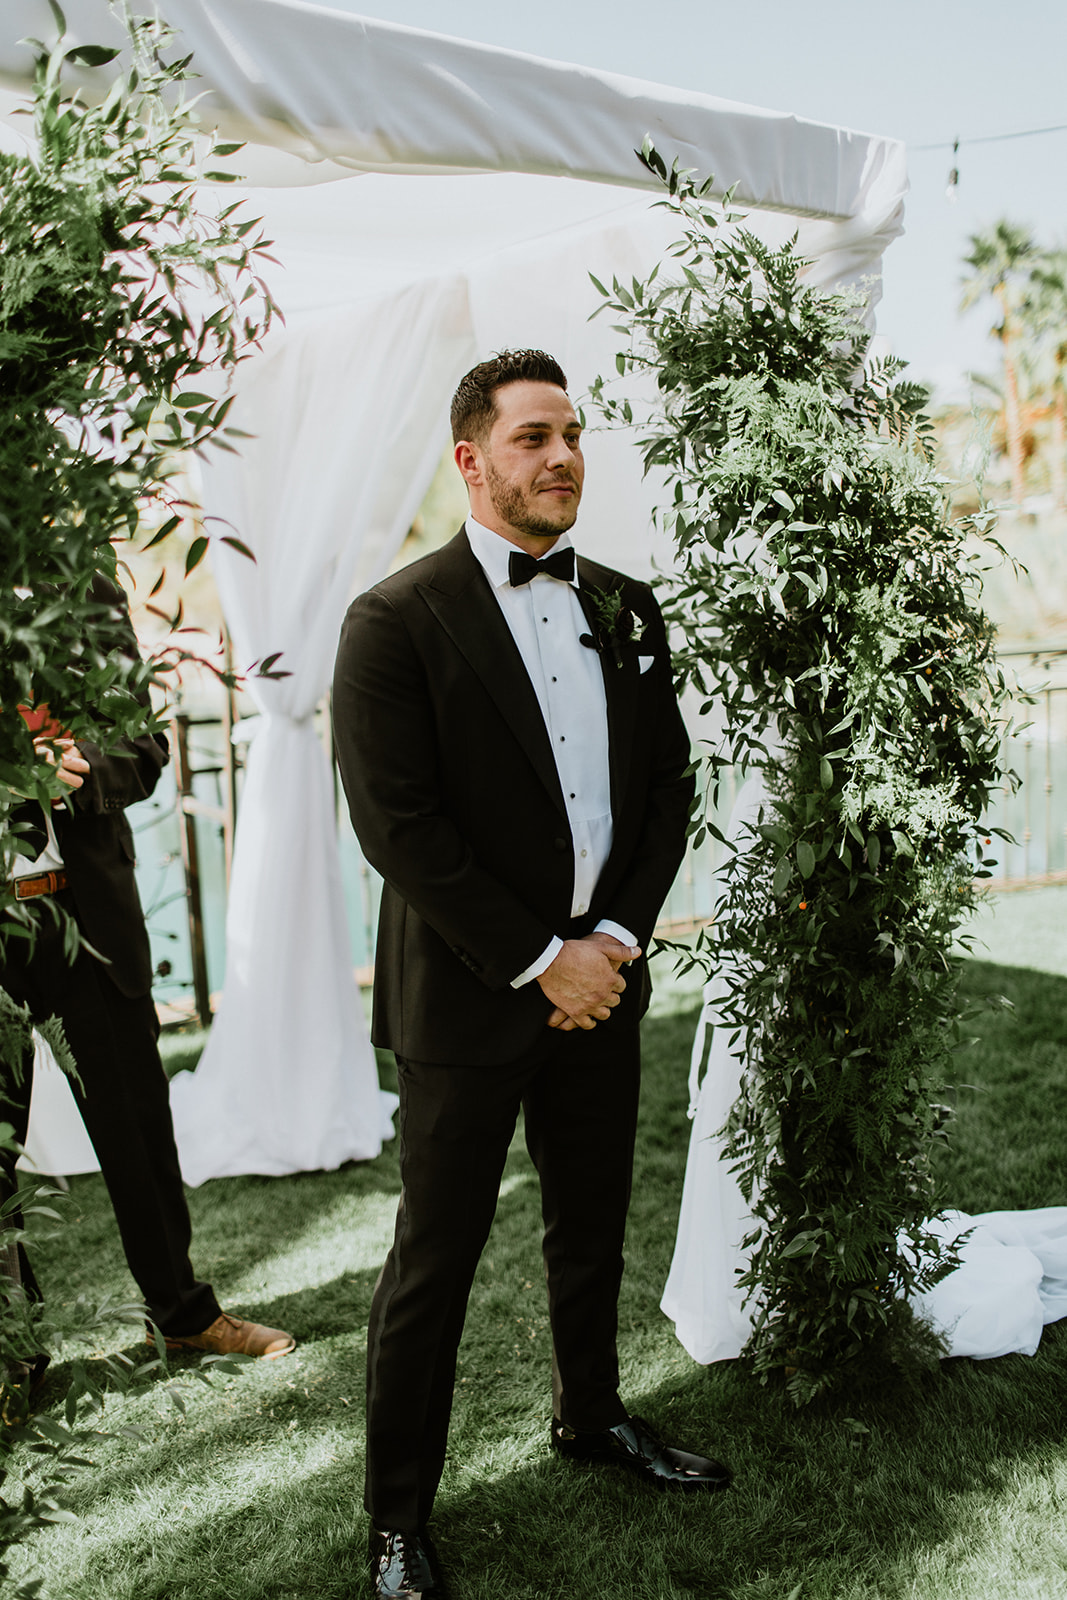 Groom waiting under chuppah with greenery for bride 